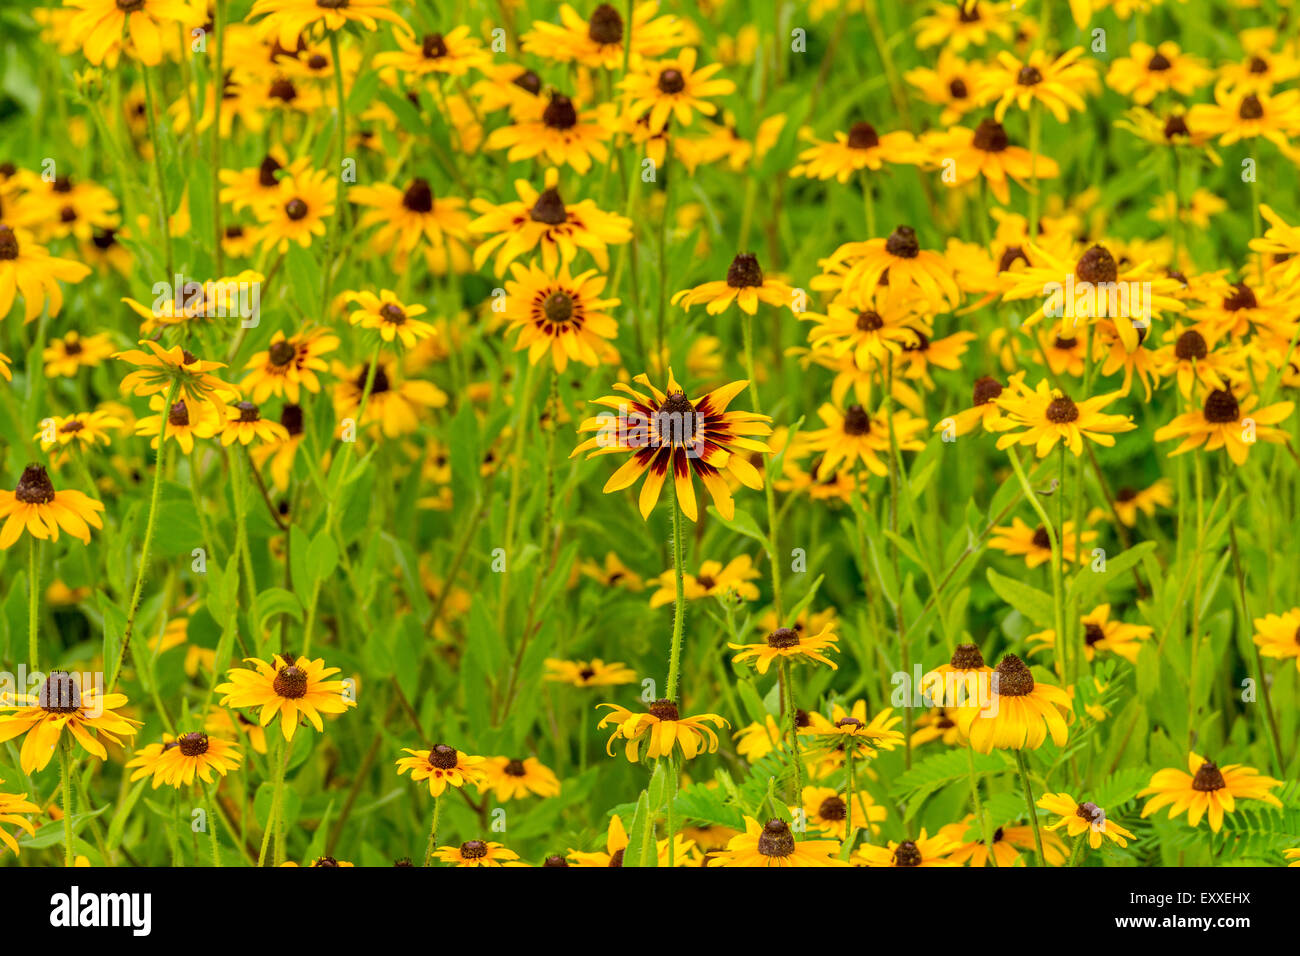 Images taken of an early summer field of the wild Black-Eyed-Susan flowers found in Downingtown, Chester County PA. Stock Photo